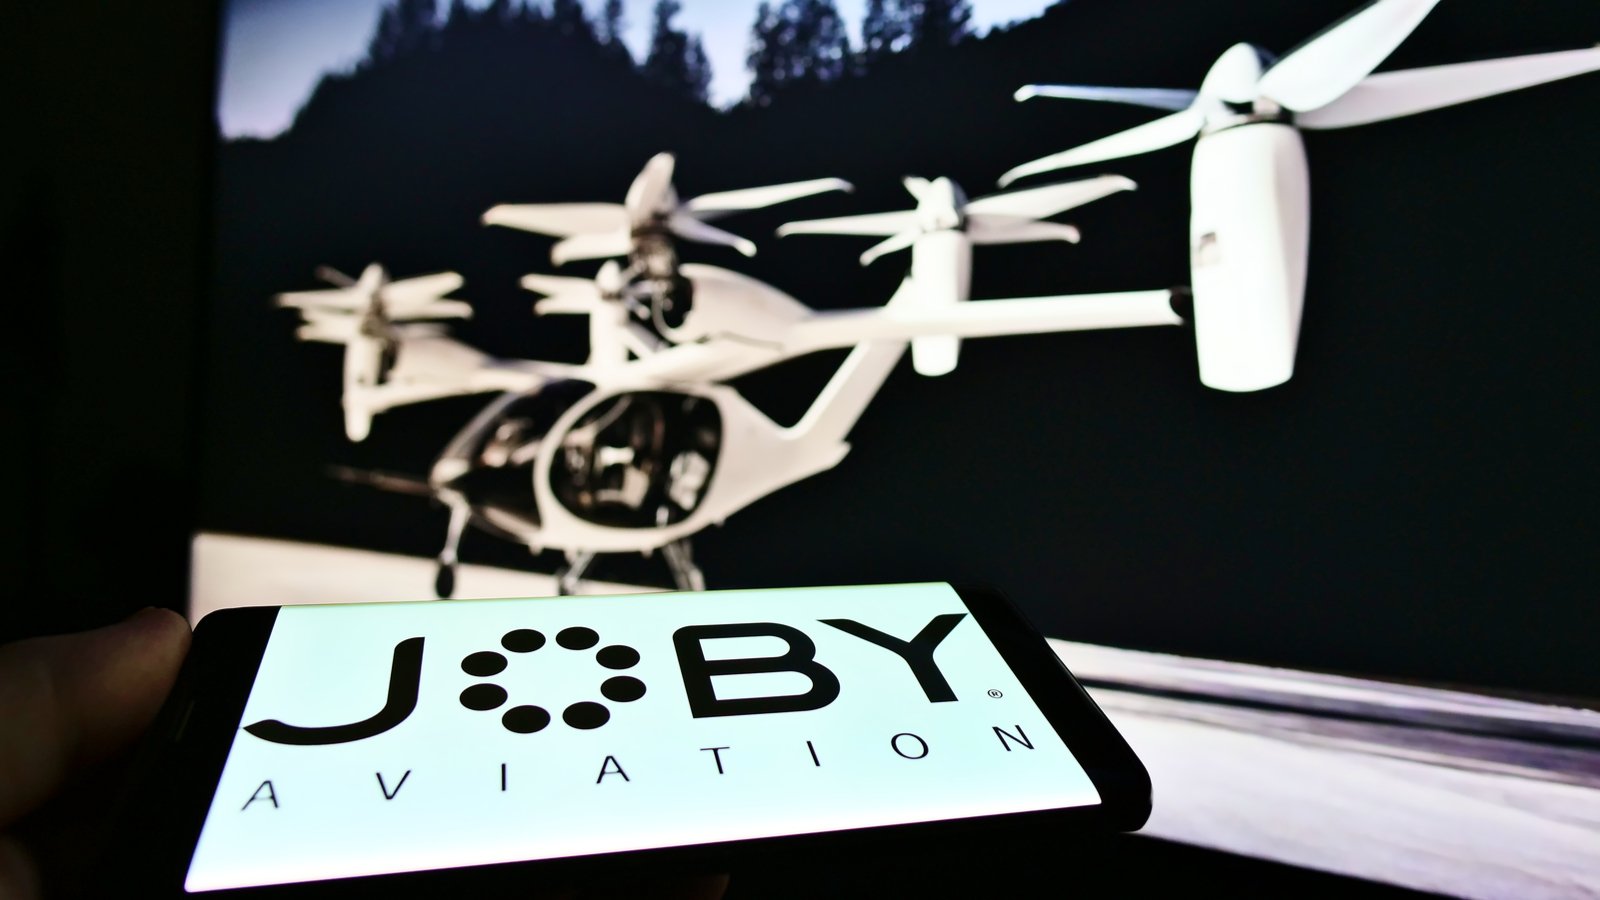 Person holding smartphone with logo of startup and aerospace company Joby Aviation (air taxi) on screen JOBY stock.